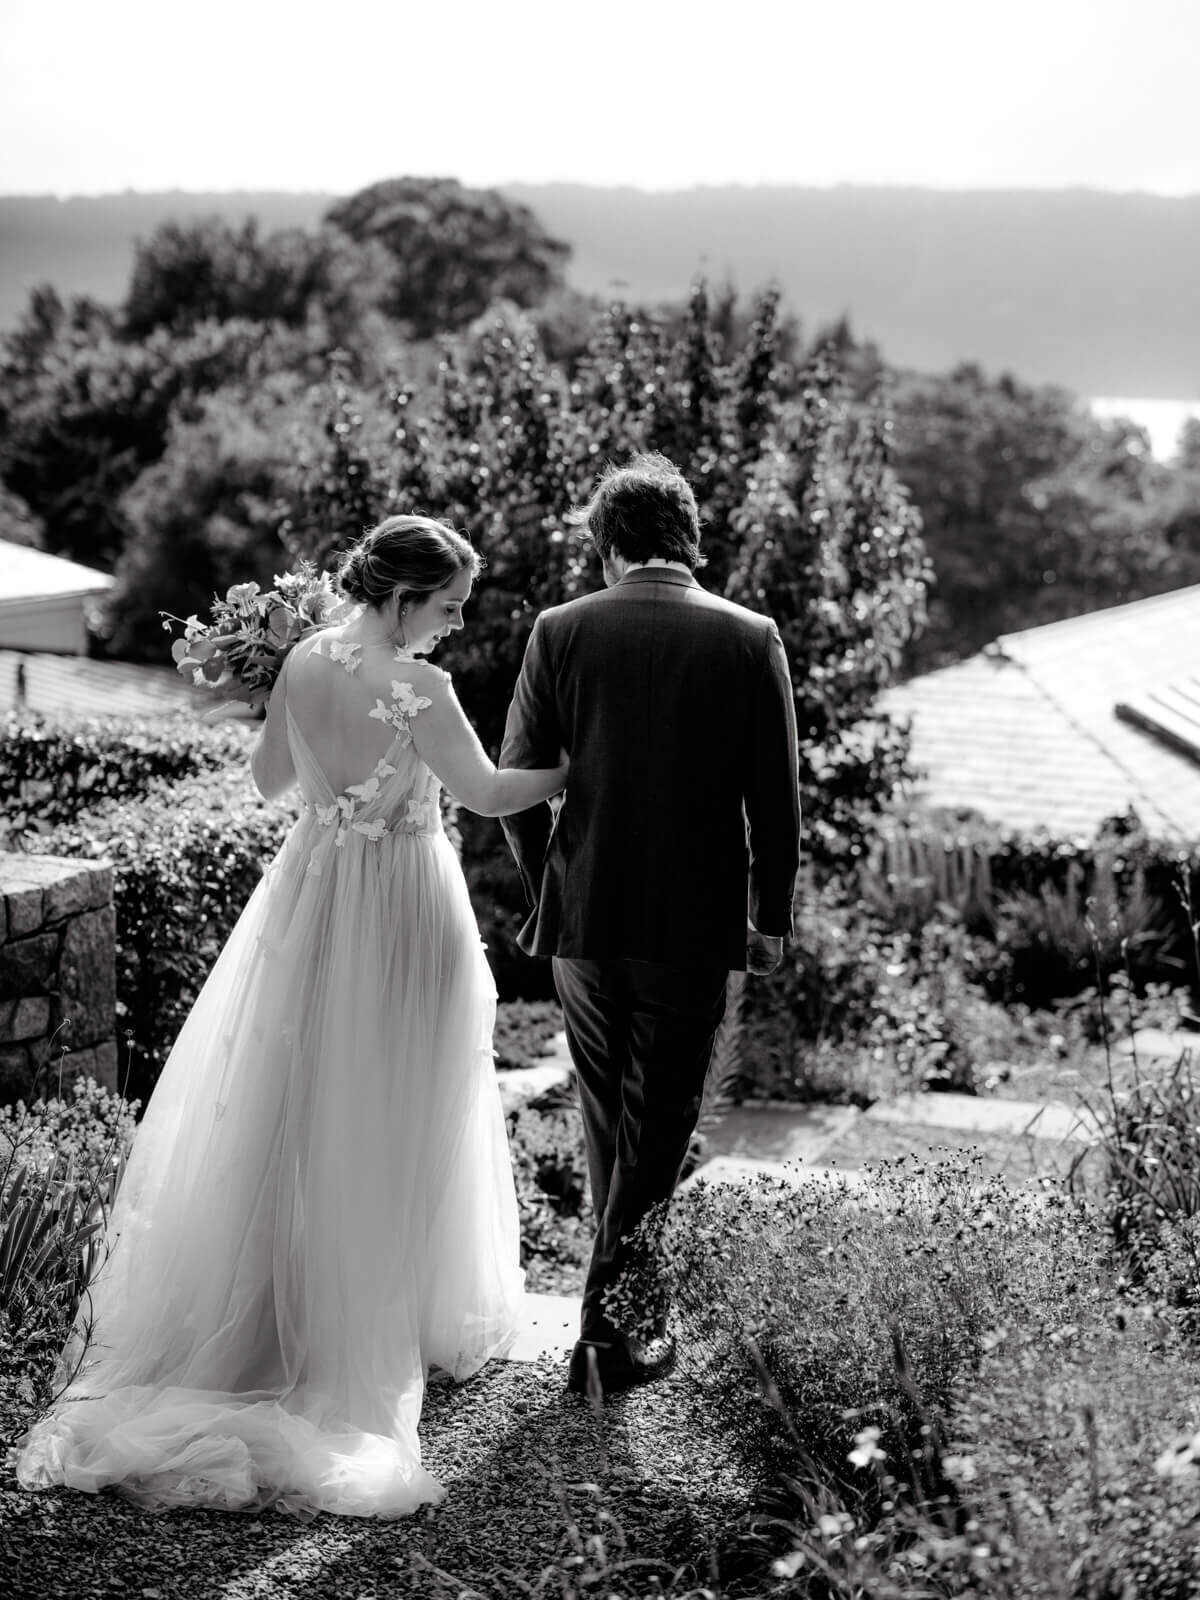 Back view of the bride and the groom, while the bride, looking down sideways, is holding on the groom's arms, at a garden